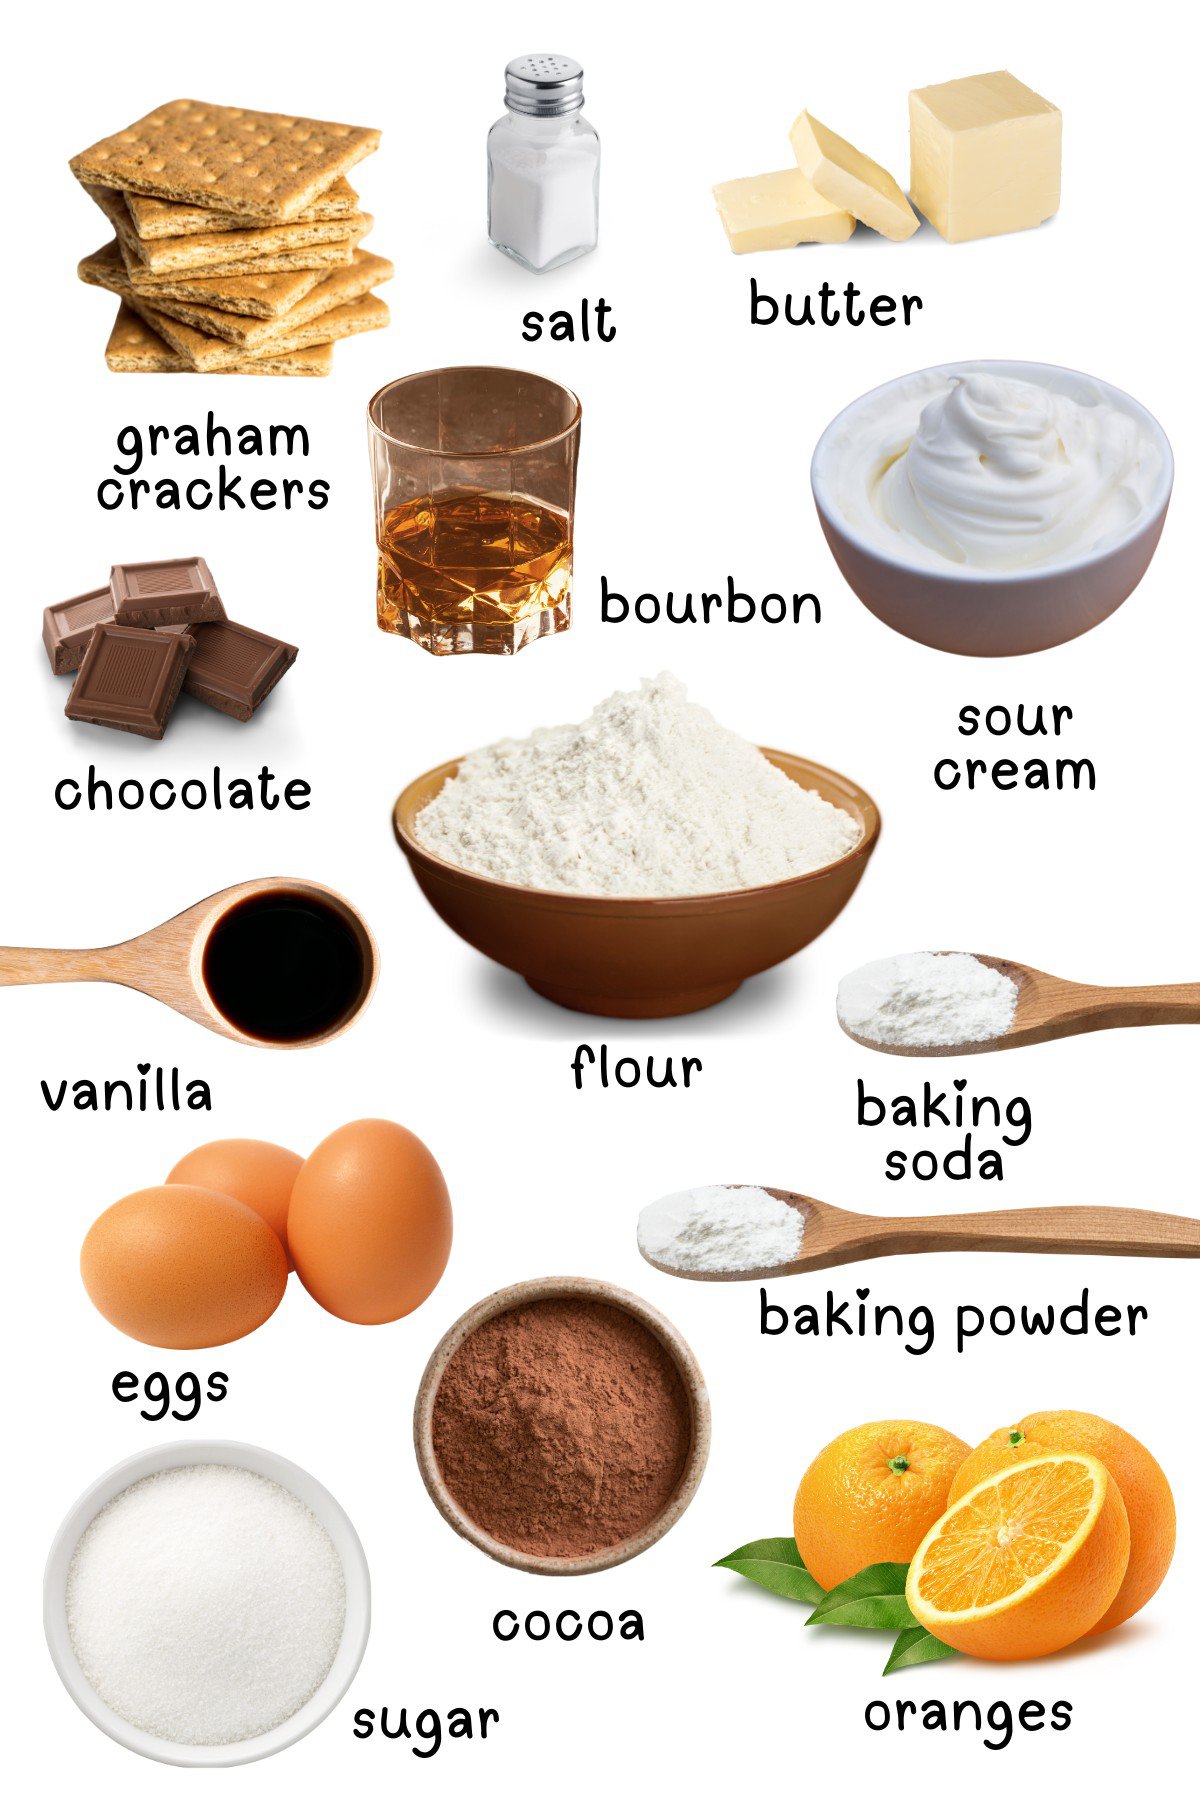 Labeled ingredients for marble pound cake.